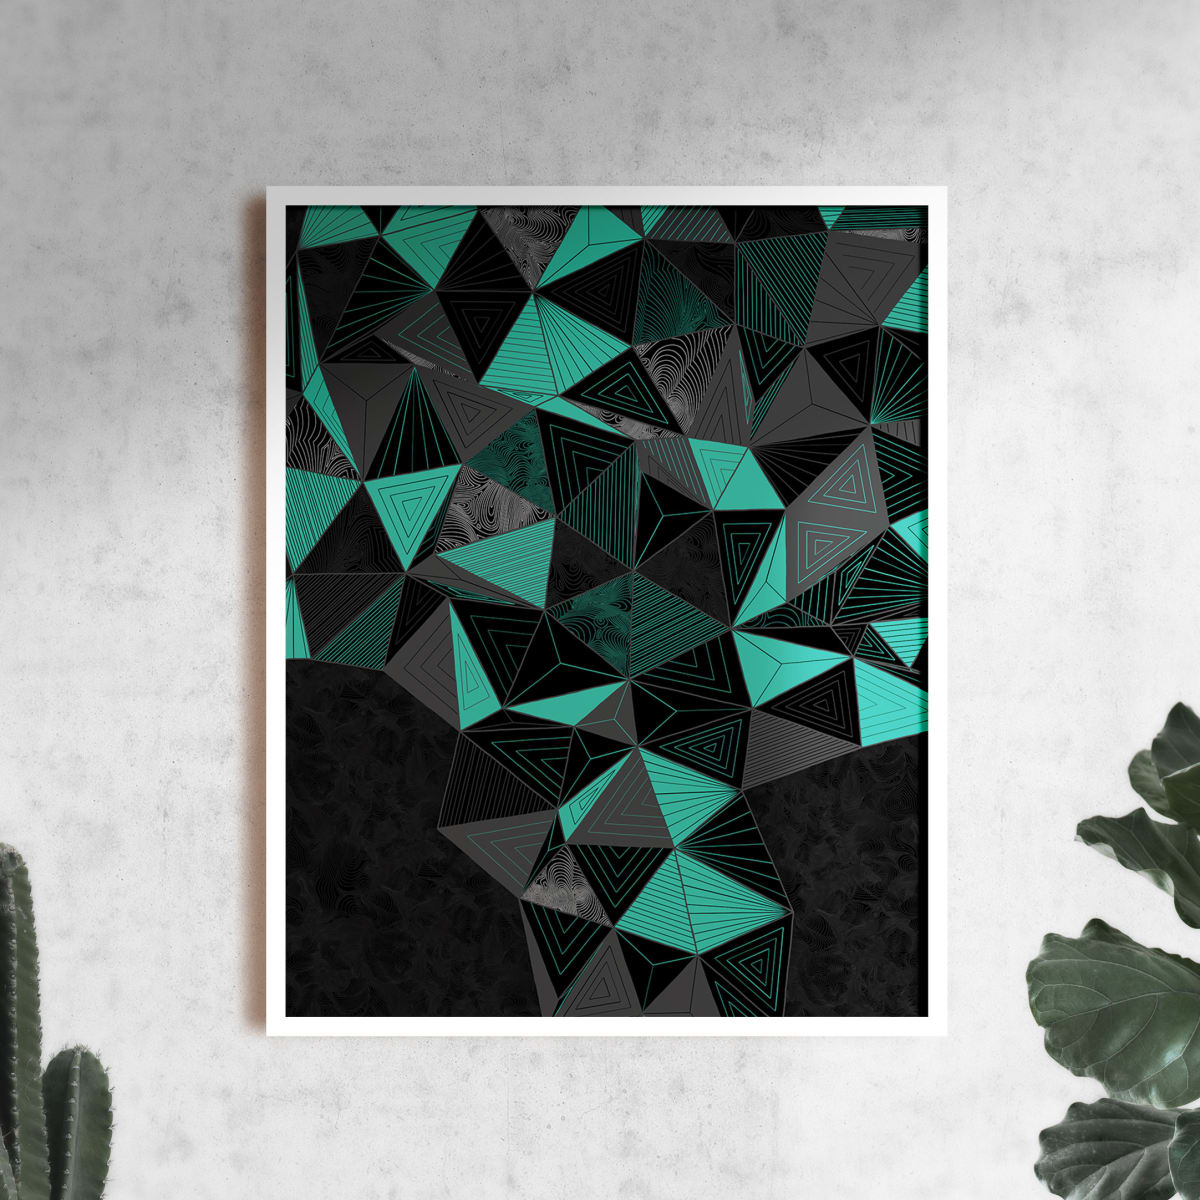 "Conscious Growth 089" Large One-of-a-Kind Print by Debbie Clapper  Image: Conscious Growth Print 089, a black, green, and gray one of a kind archival modern art print